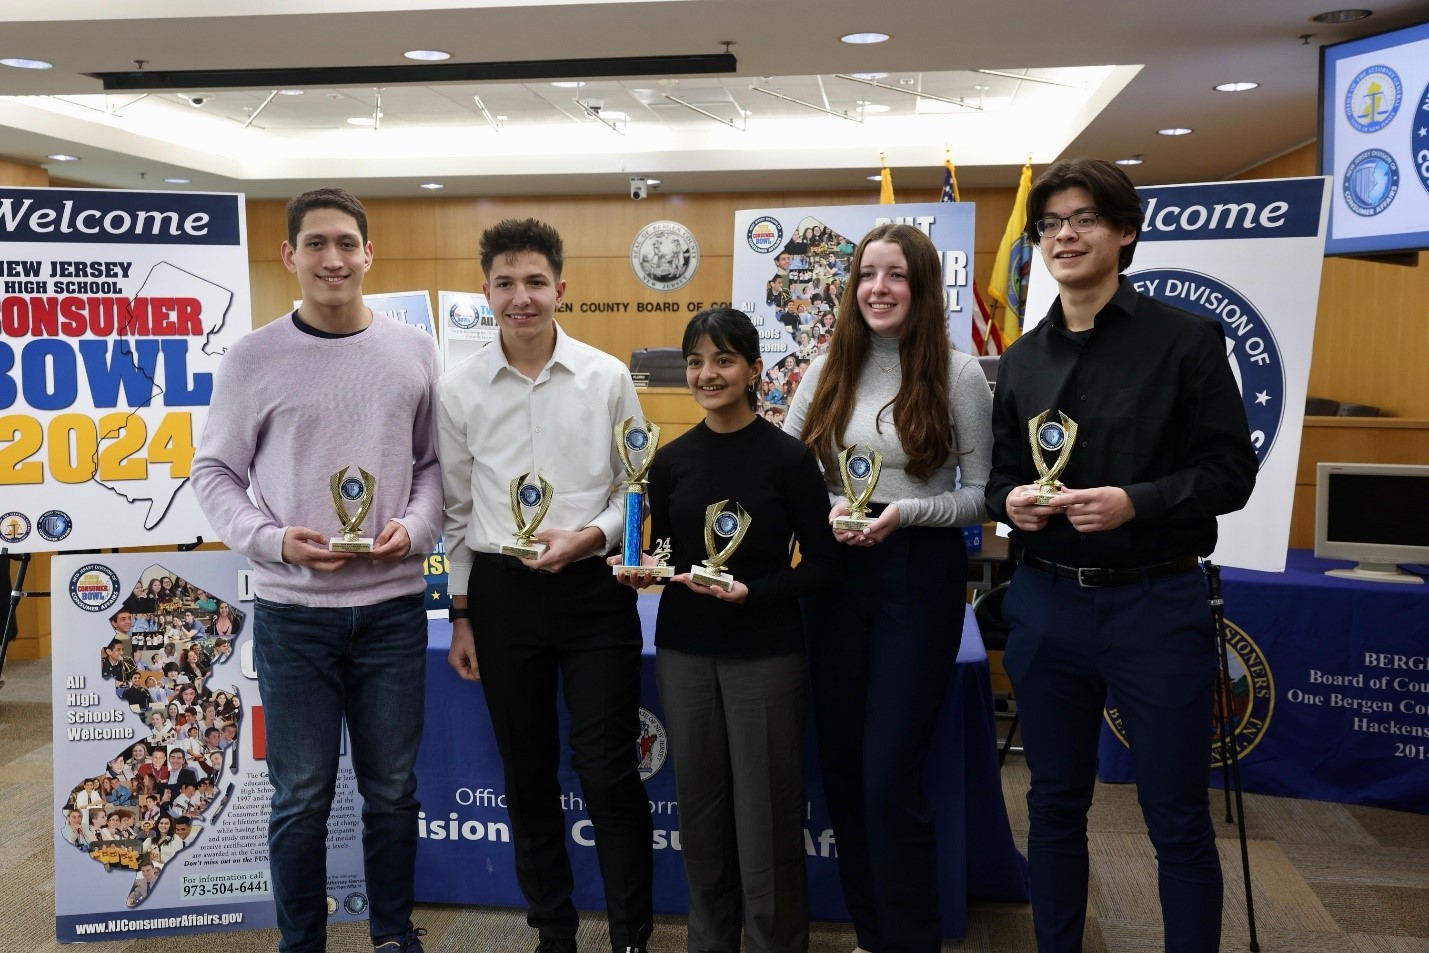 rutherford high school wins bergen county consumer bowl 1